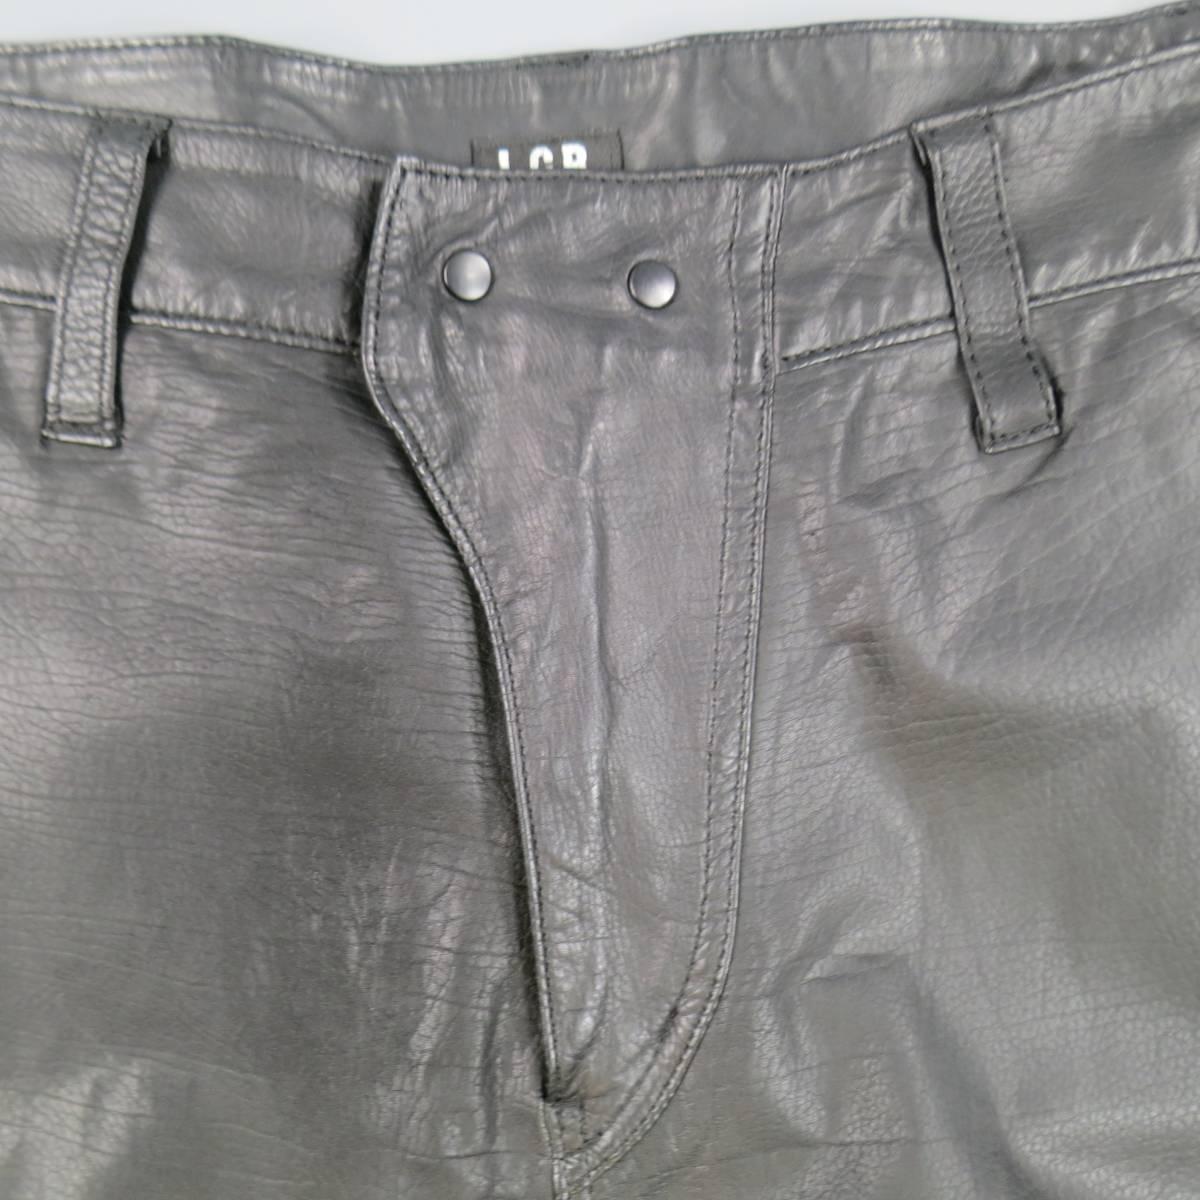 These cropped drop crotch pants by L.G.B. come in soft, light weight black leather with a snap closure front, suede under panel, snap pockets, side tabs, and ribbed band hem. Made in Japan.
 
Good Pre-Owned Condition.
Marked: 2
